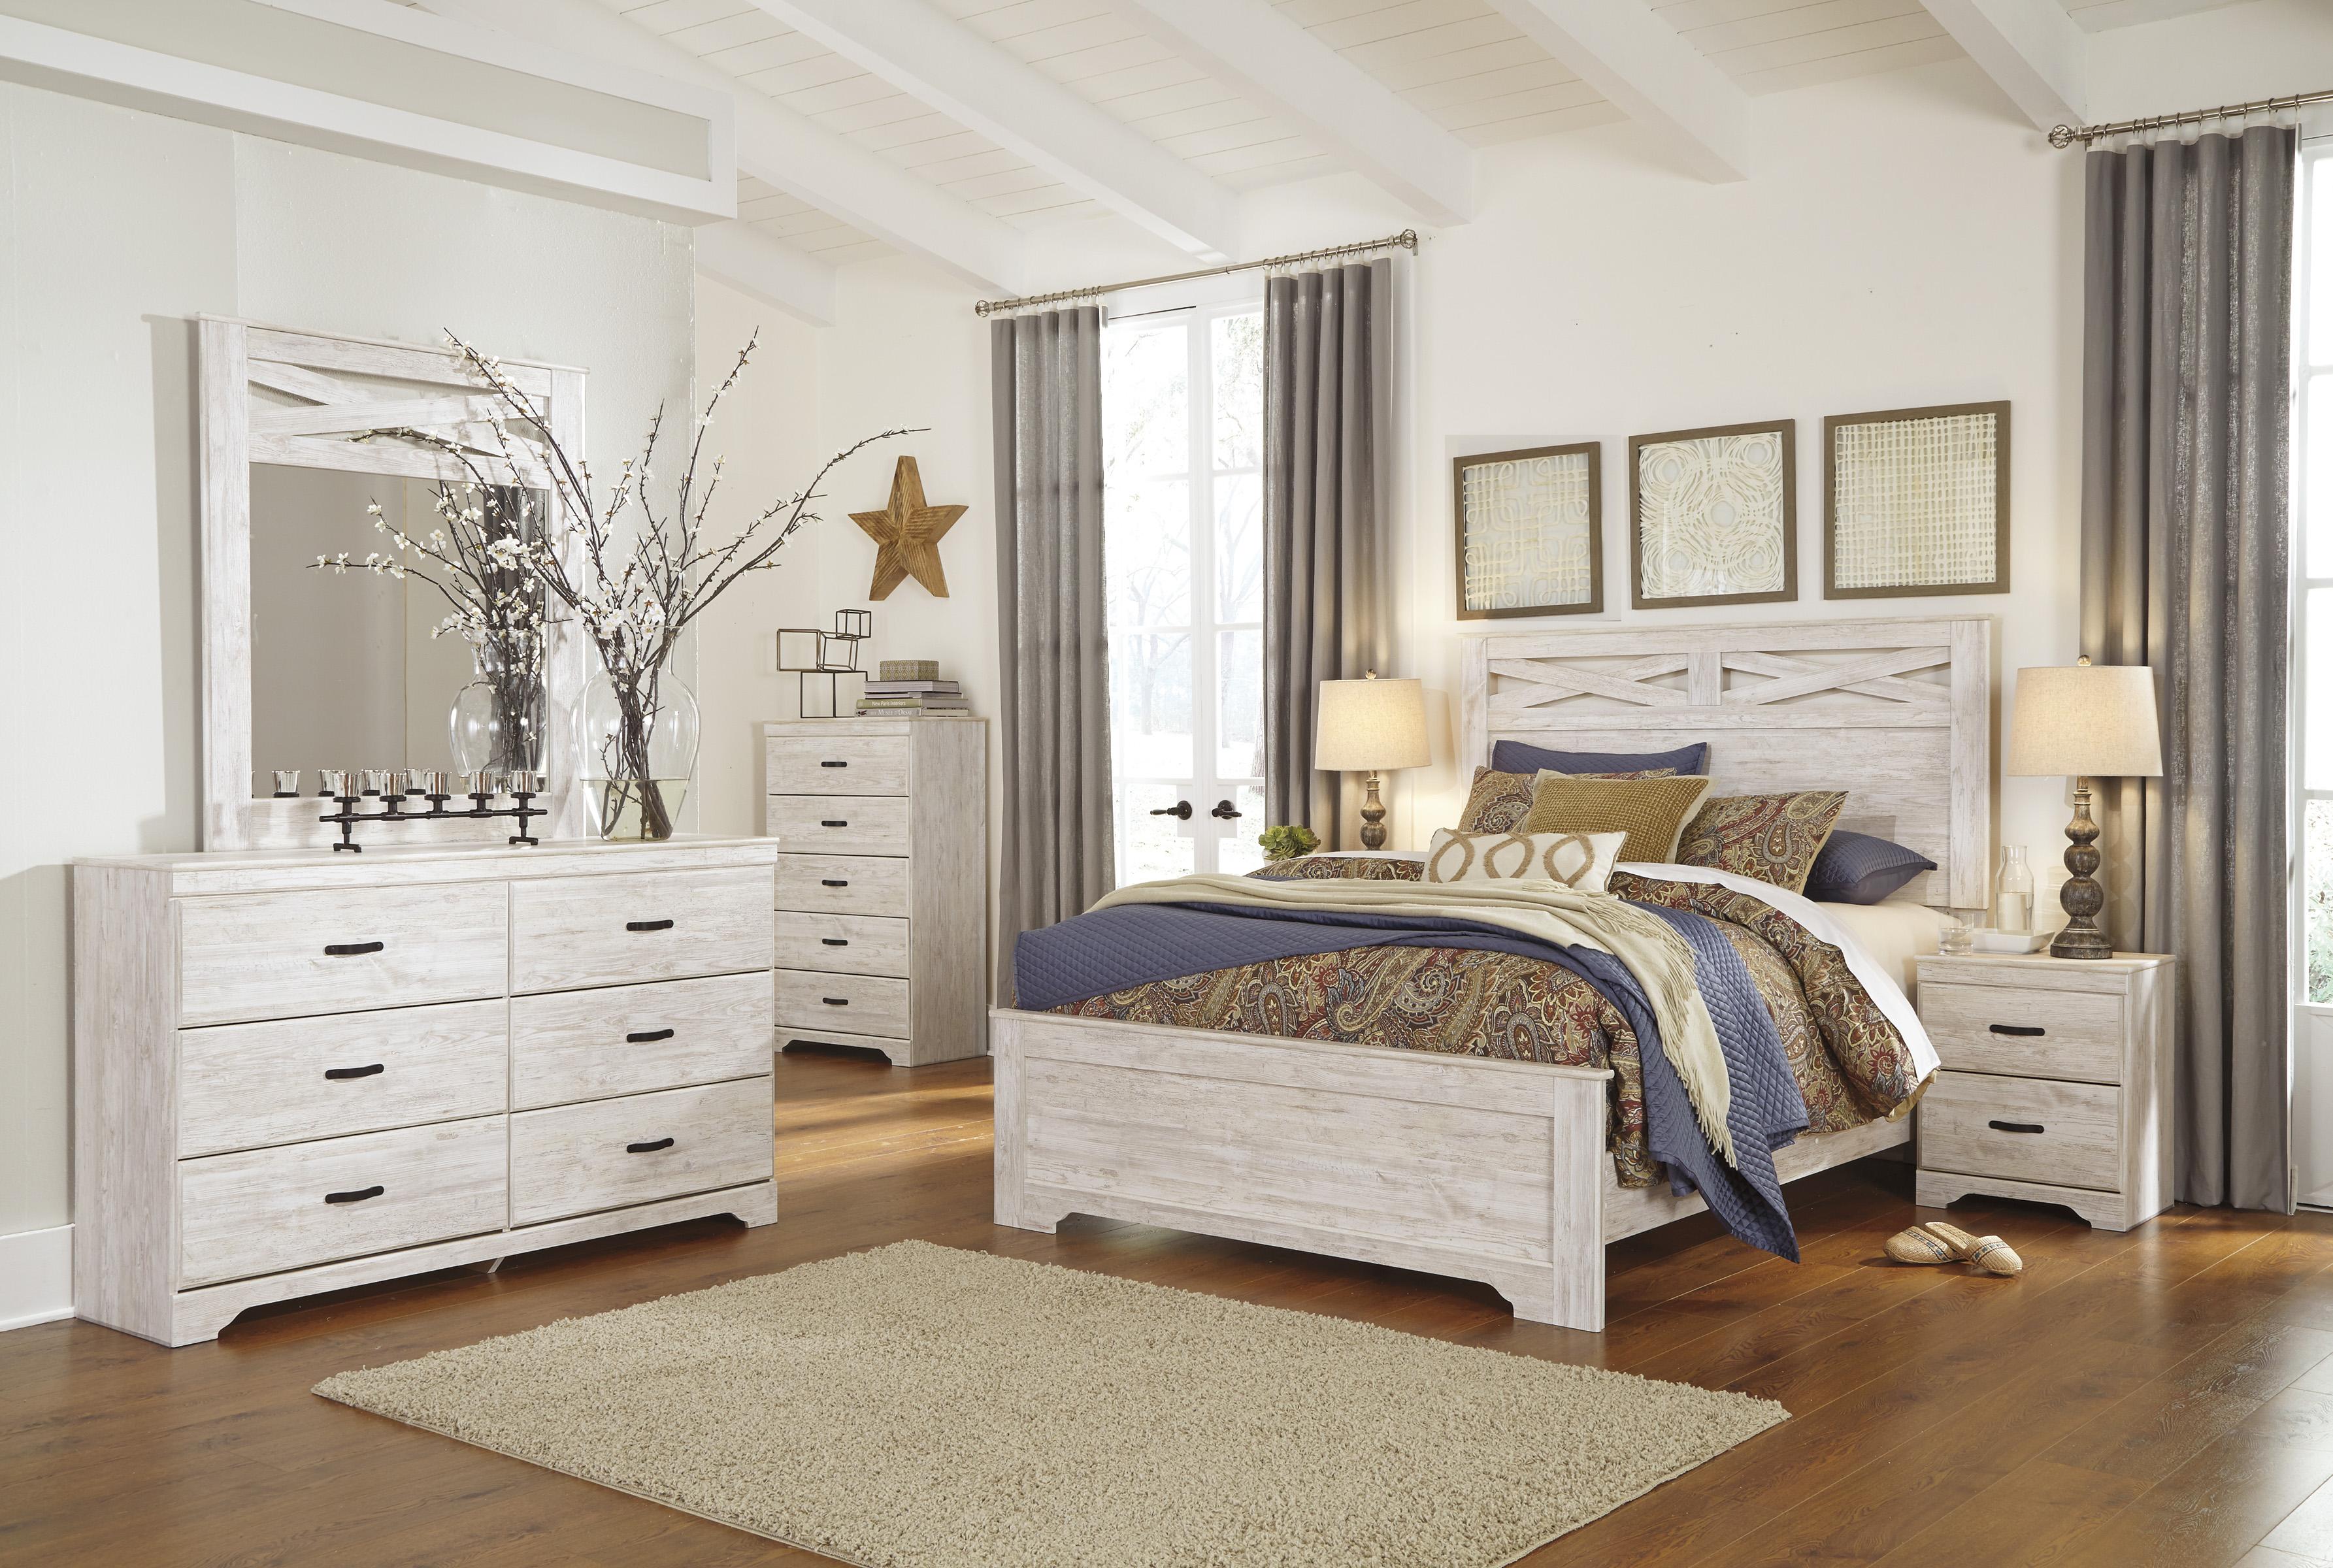 

    
Ashley Briartown B218 Queen Size Panel Bedroom Set 3pcs in Whitewash
